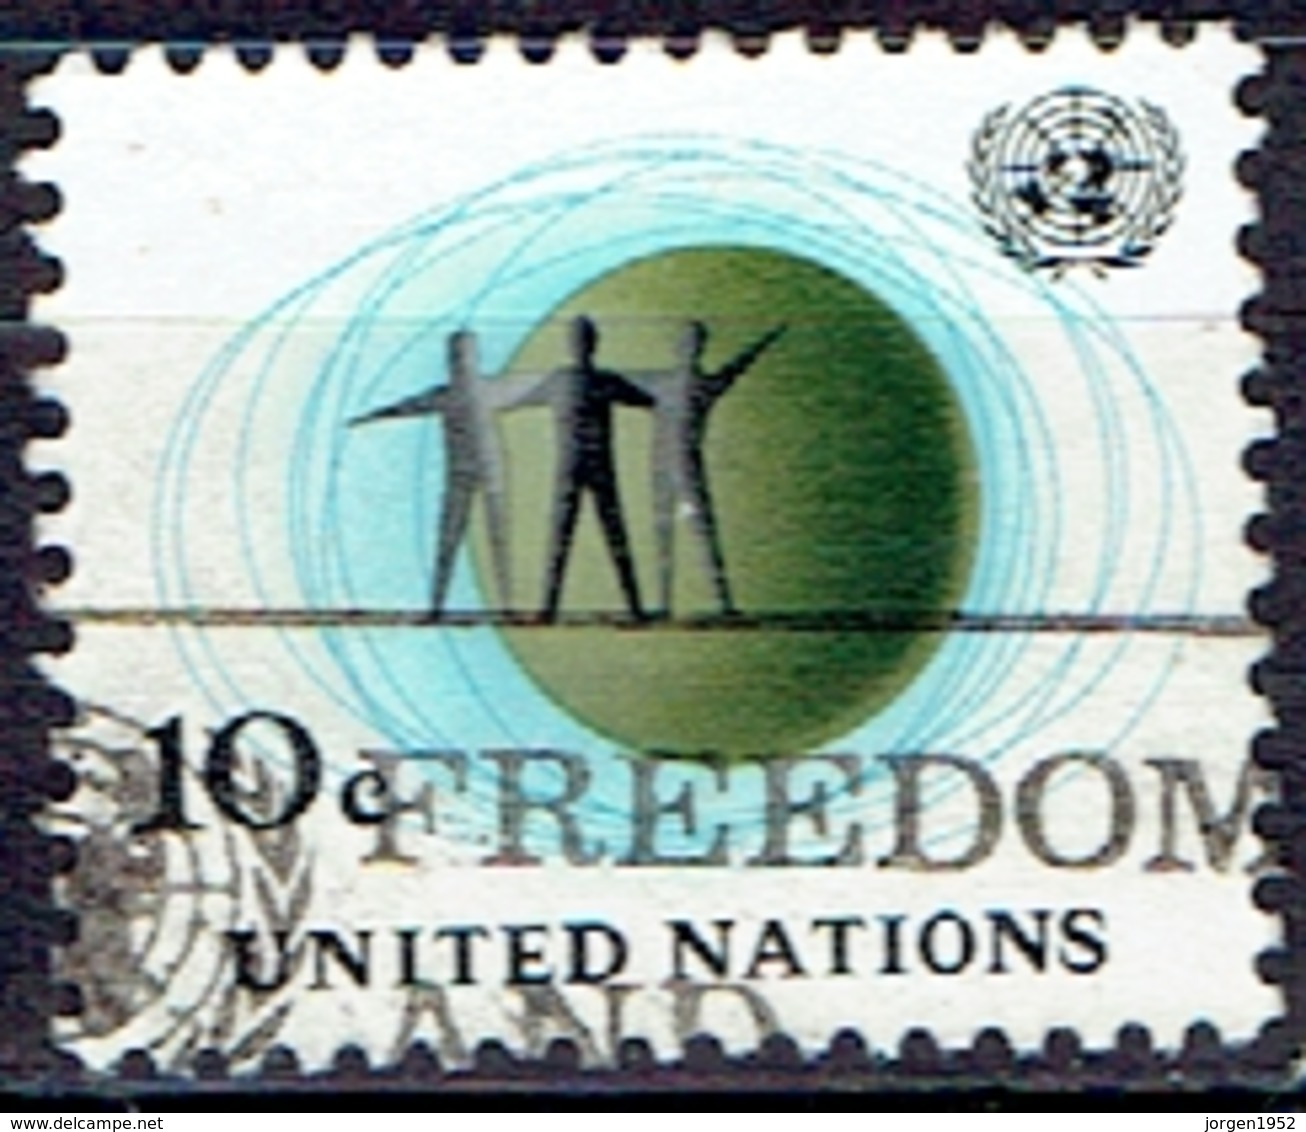 UNITED NATIONS # FROM 1961 STAMPWORLD 103 - Gebraucht